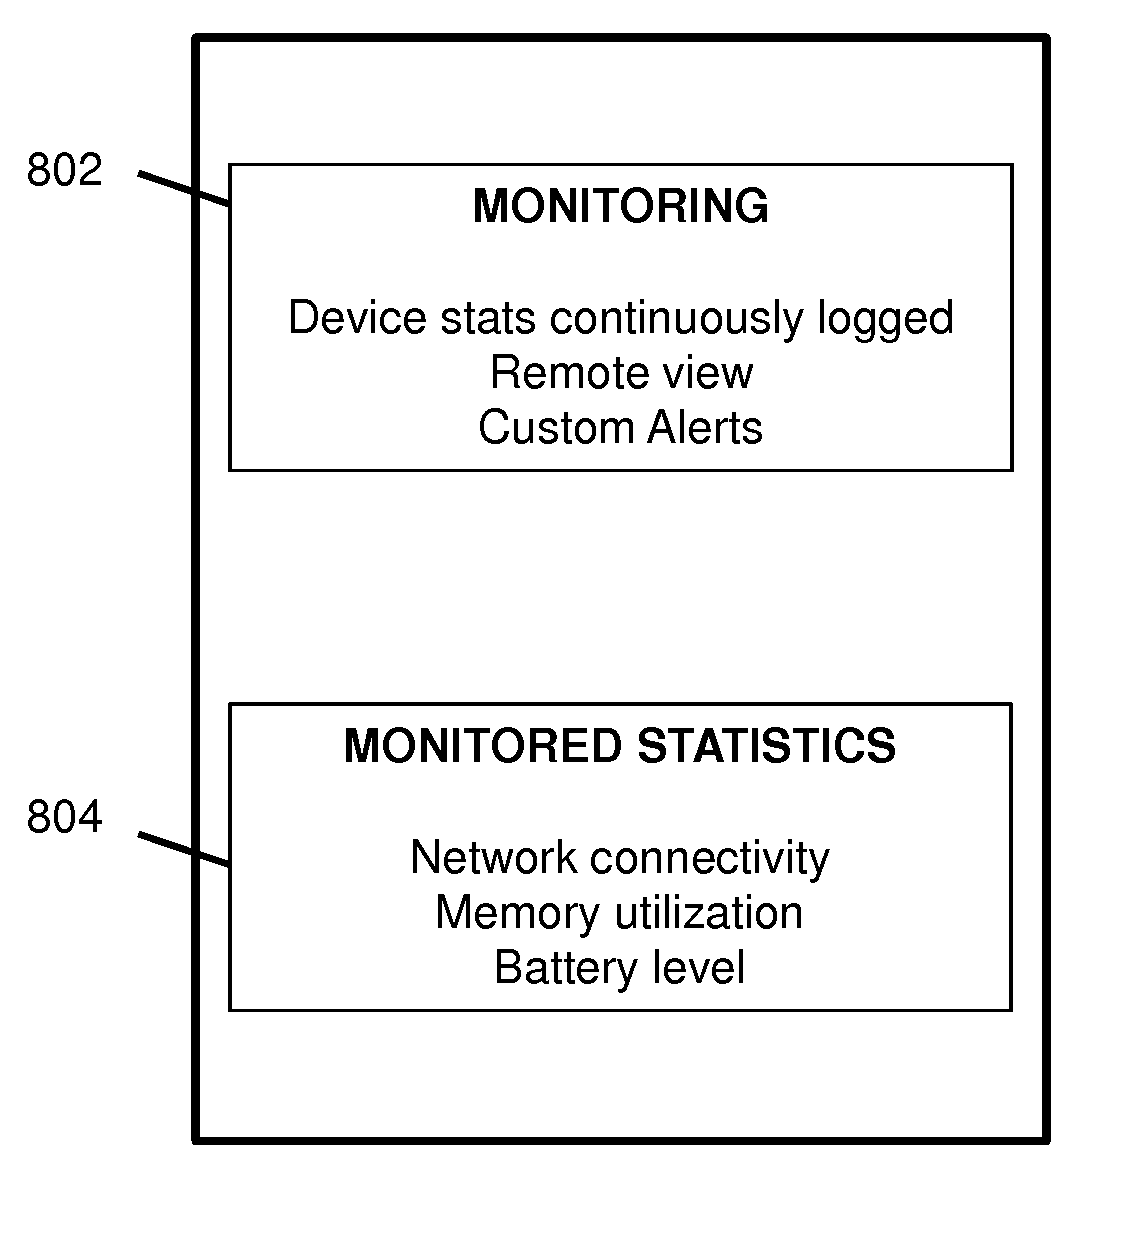 Device and settings management platform